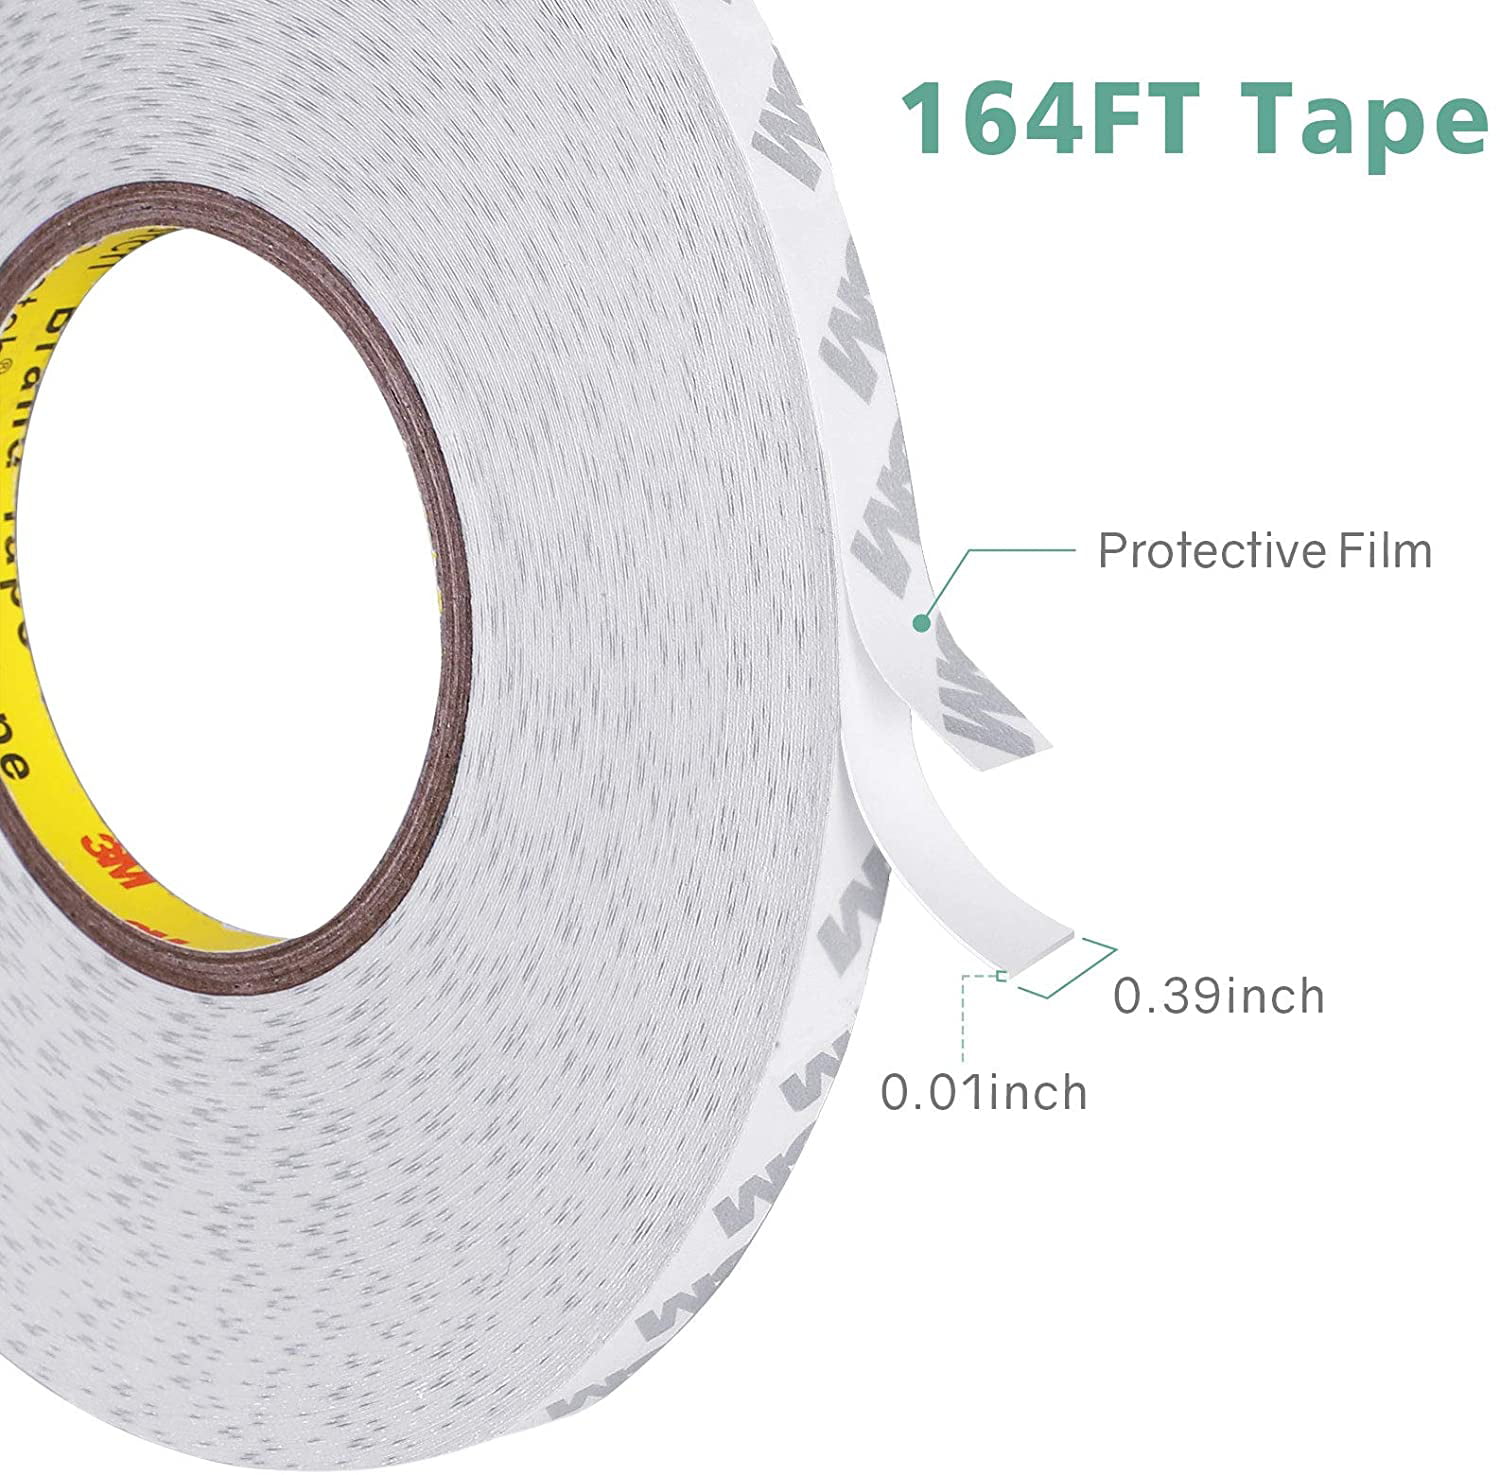 Double Sided Tape 164ft Length 0 39 Inch Width Thin Waterproof Mounting Tape Easy Peel Off Two Sided Tape Foam Tape For Led Strip Lights Car Home Office Decor Made Of 3m Tape